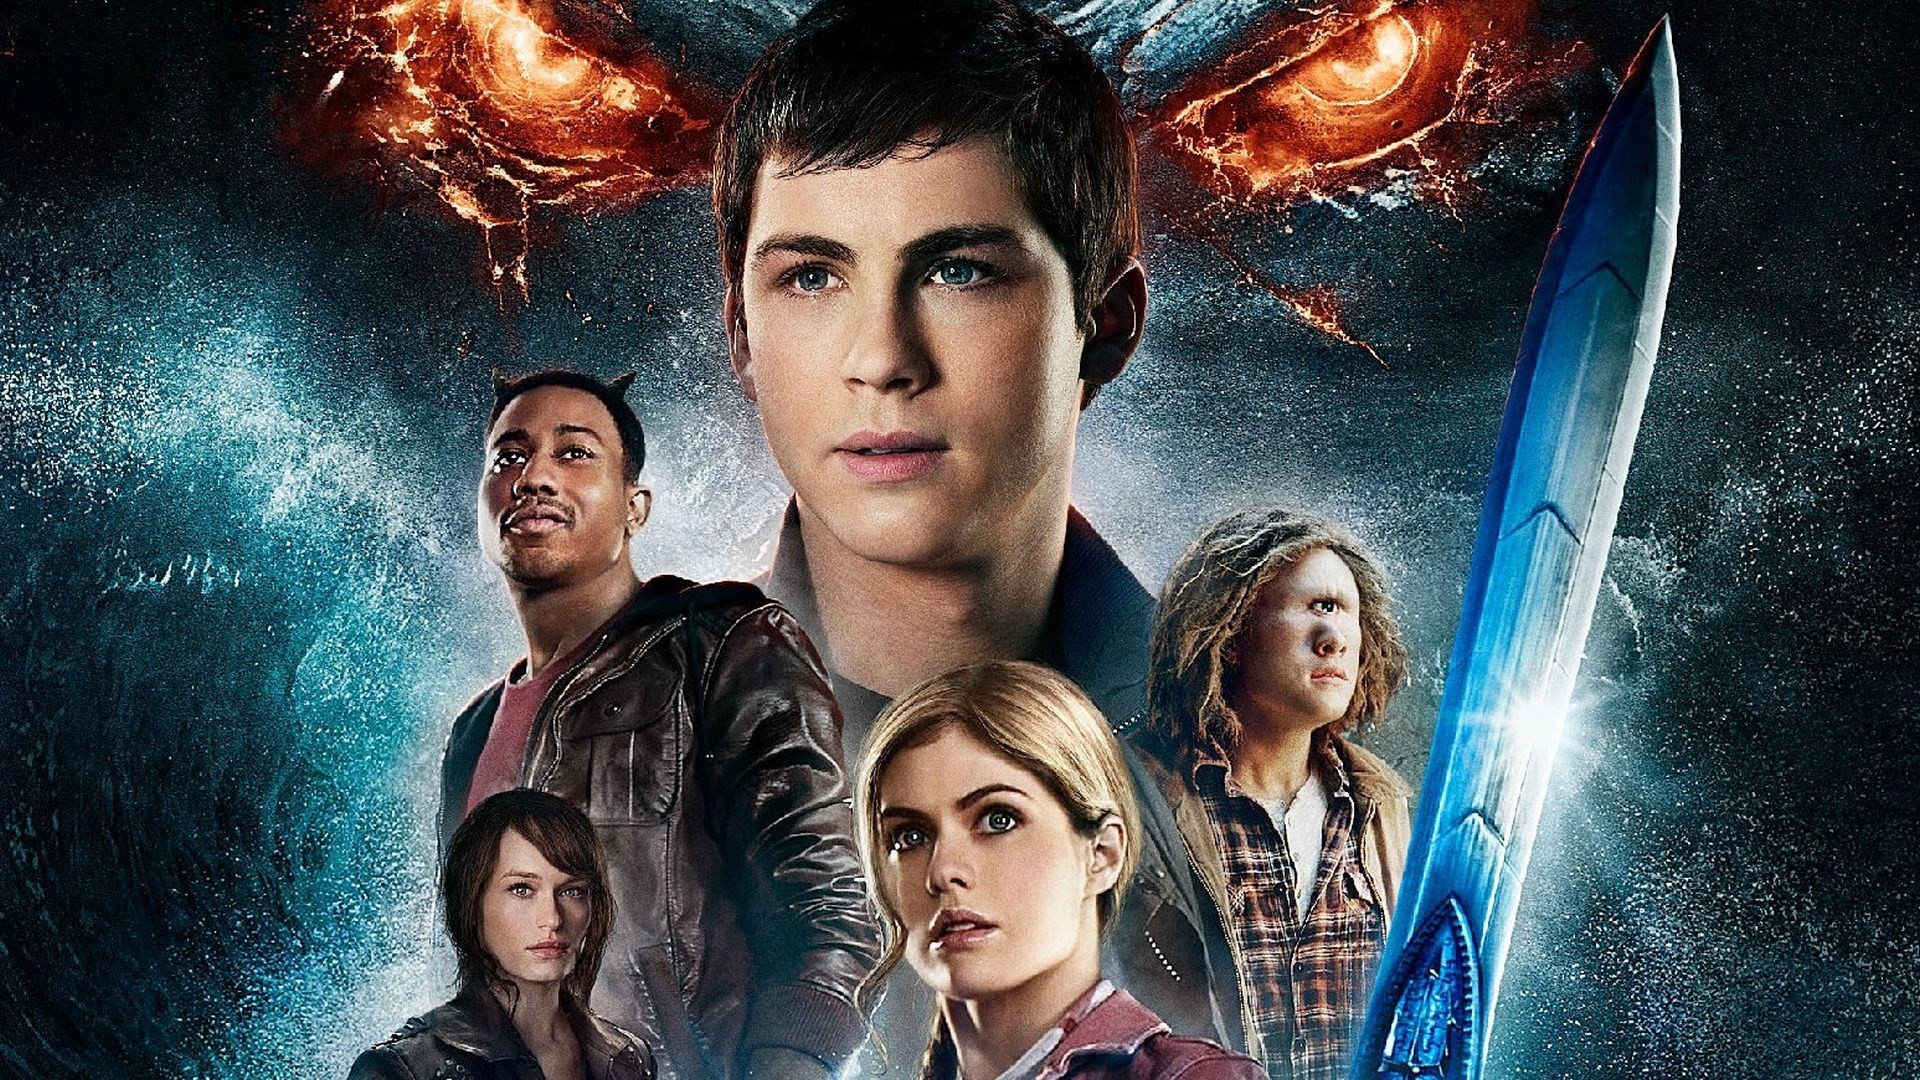 1920x1080 percy jackson sea of monsters backgrounds images, 847 kB - Ridley Williams